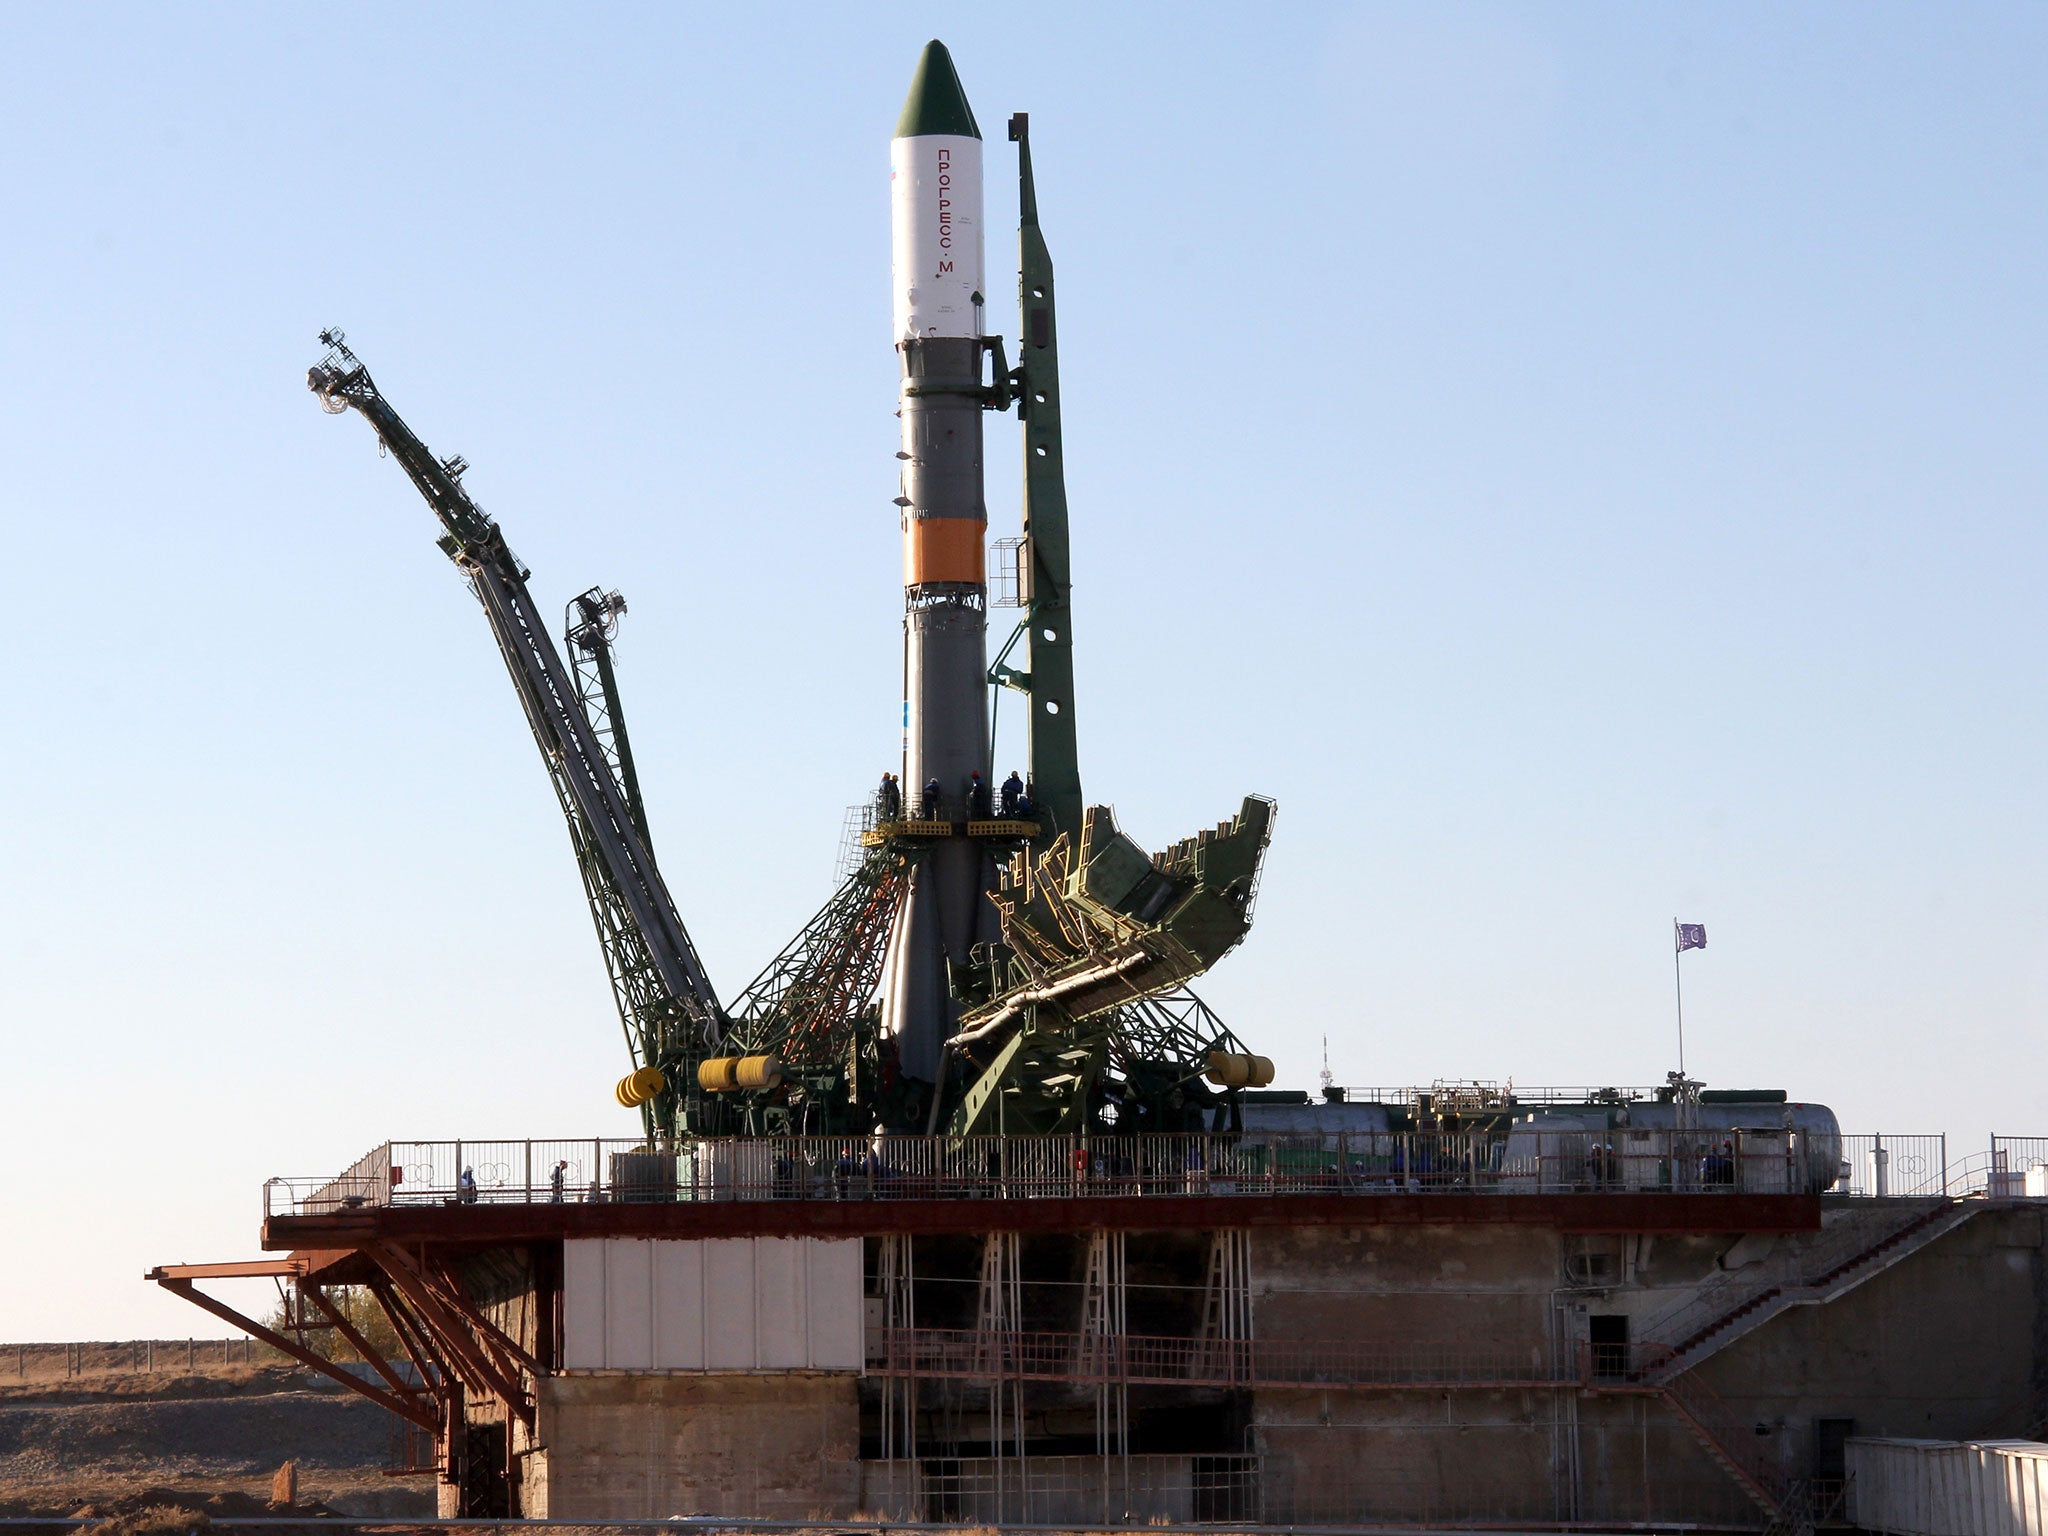 A Russian Soyuz-U booster carrying an unmanned cargo spacecraft Progress atop rises on a launch pad at the Russian leased Kazakhstan's Baikonur cosmodrome, on October 29, 2012